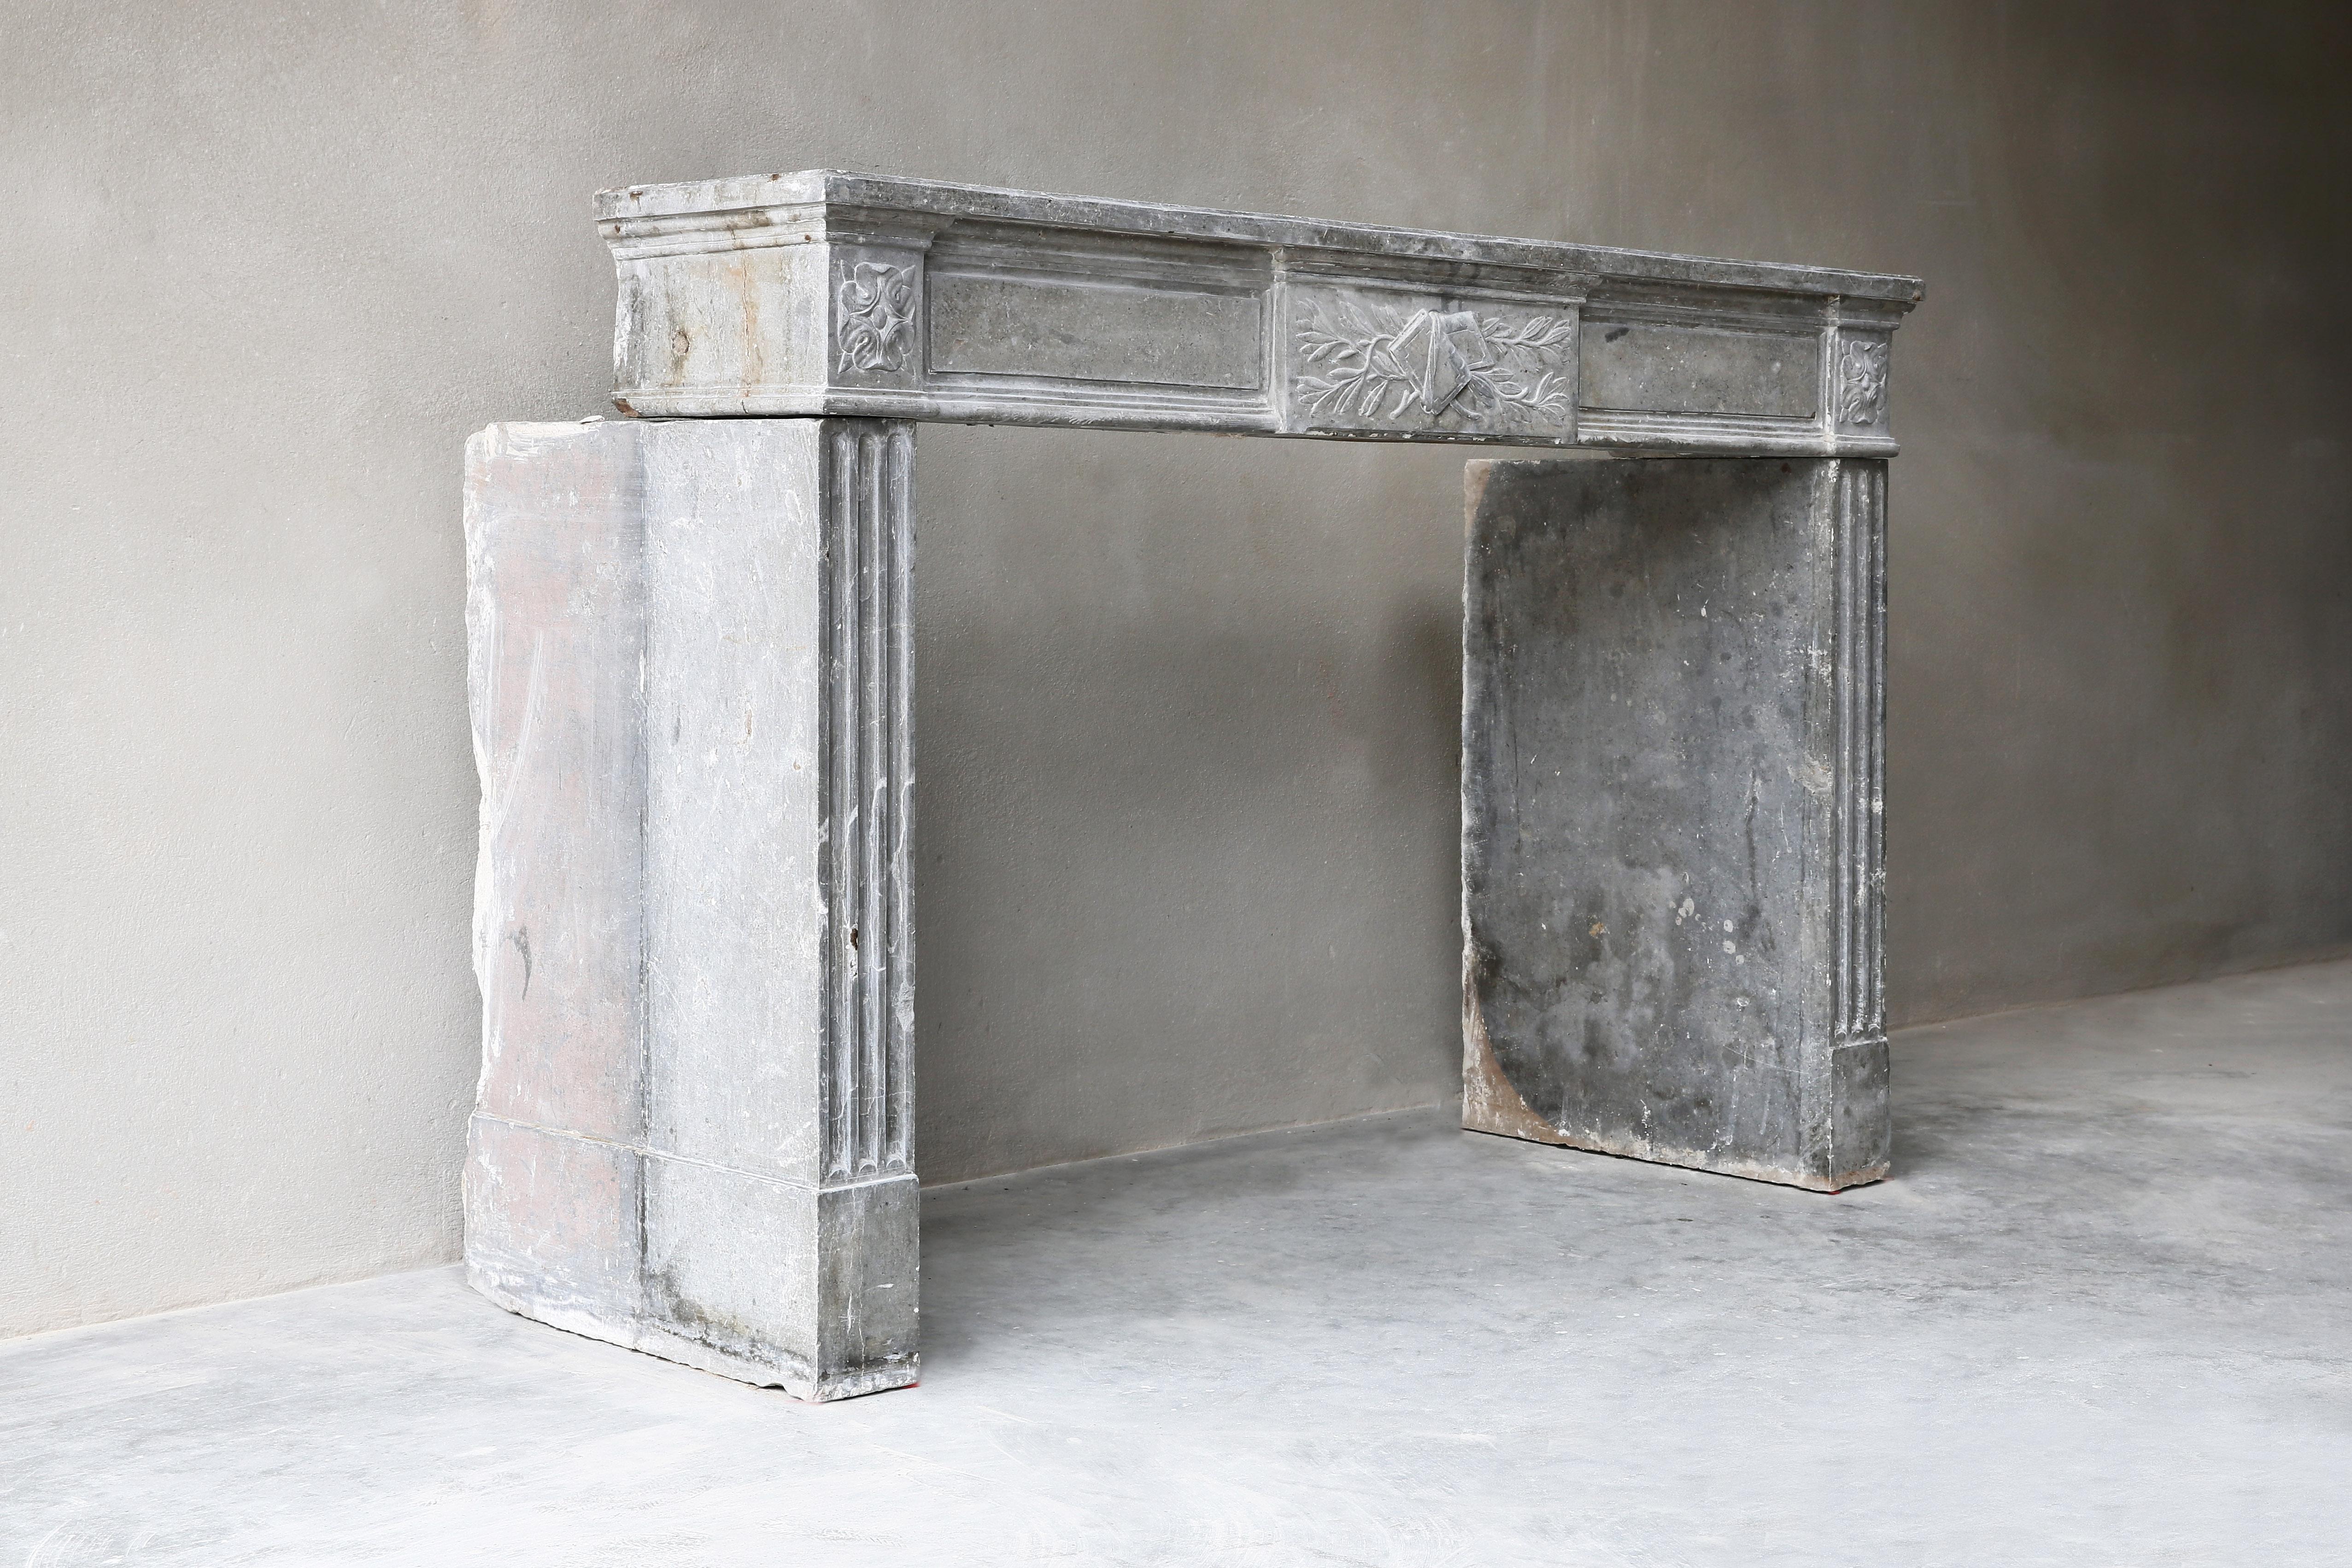 Very exclusive antique fireplace made of gray marble stone! This fireplace has an authentic look due to the color scheme and shape. The fireplace dates from the 18th century and is in the style of Louis XVI. The front part has a beautiful ornament